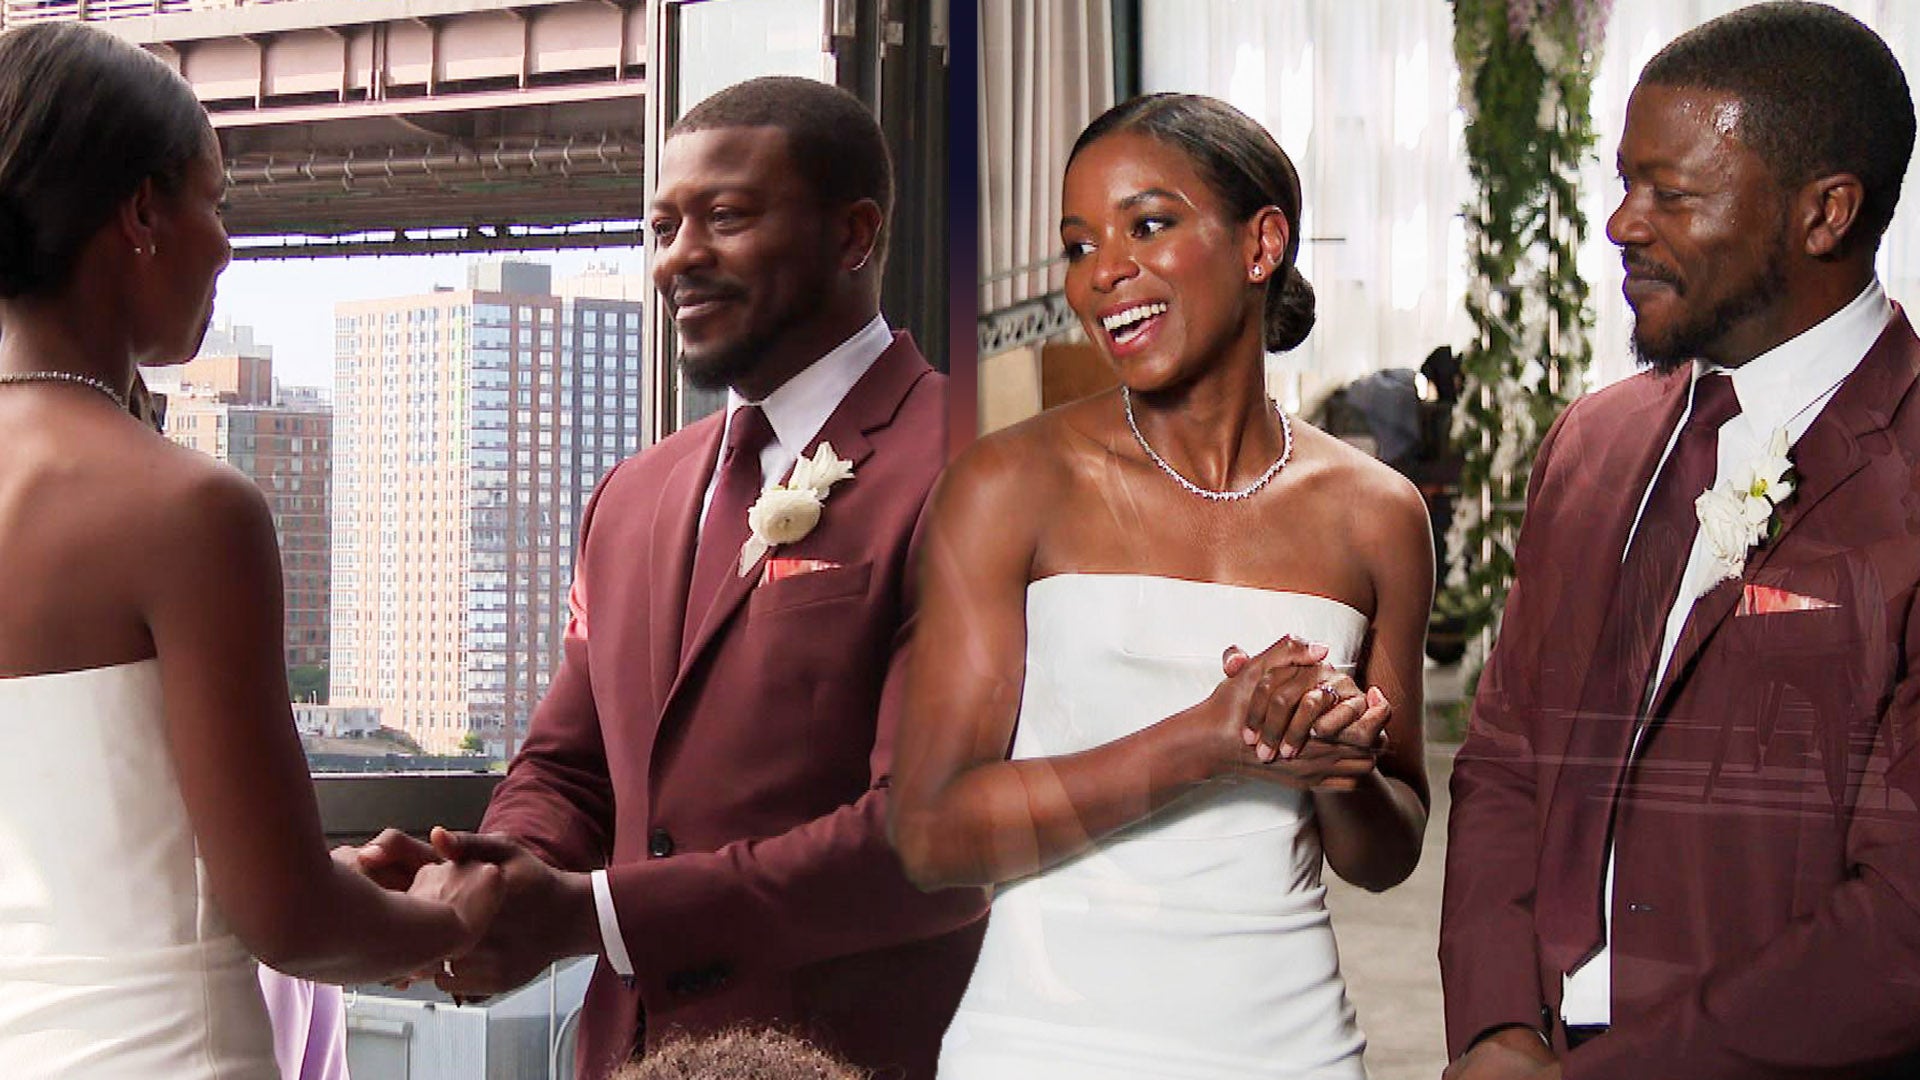 ‘FBI: Most Wanted’ Cast Reveals Behind-the-Scenes Secrets From Ray and Cora’s Wedding (Exclusive)